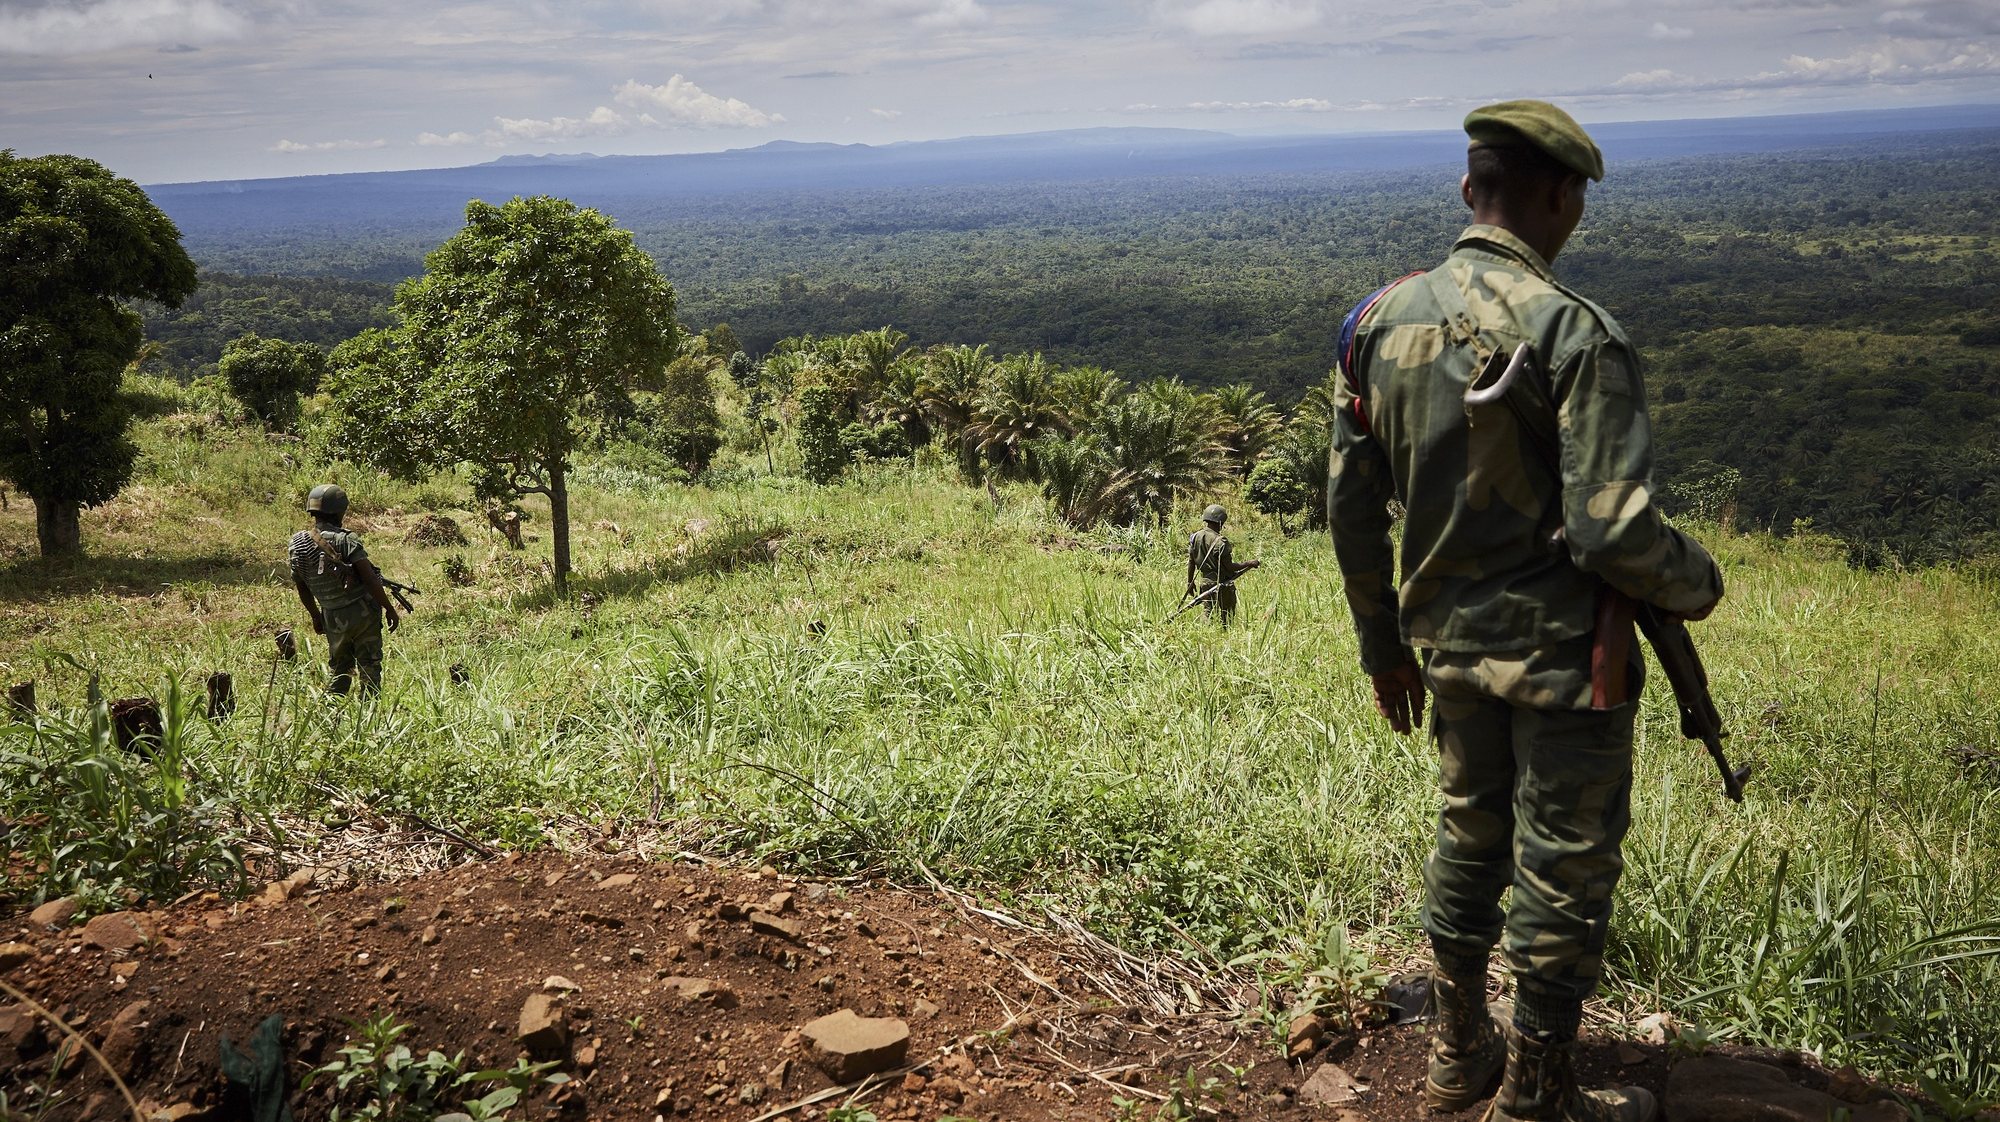 epa07567840 Soldiers of the Congolese national army, the Armed Forces of the Democratic Republic of the Congo (FARDC), take a position that overlooks the so-called &#039;triangle of death&#039; where the ADF militia group operate, in Beni, North Kivu province, Democratic Republic of the Congo, 11 May 2019 (issued 13 May 2019). Dealing with the Ebola outbreak in Beni has multiple security challenges including attacks from local Mai Mai militia group and the Ugandan-originating Allied Democratic Forces (ADF) rebel group that claimed to be connected to the Islamic State (IS) networks.  EPA/HUGH KINSELLA CUNNINGHAM